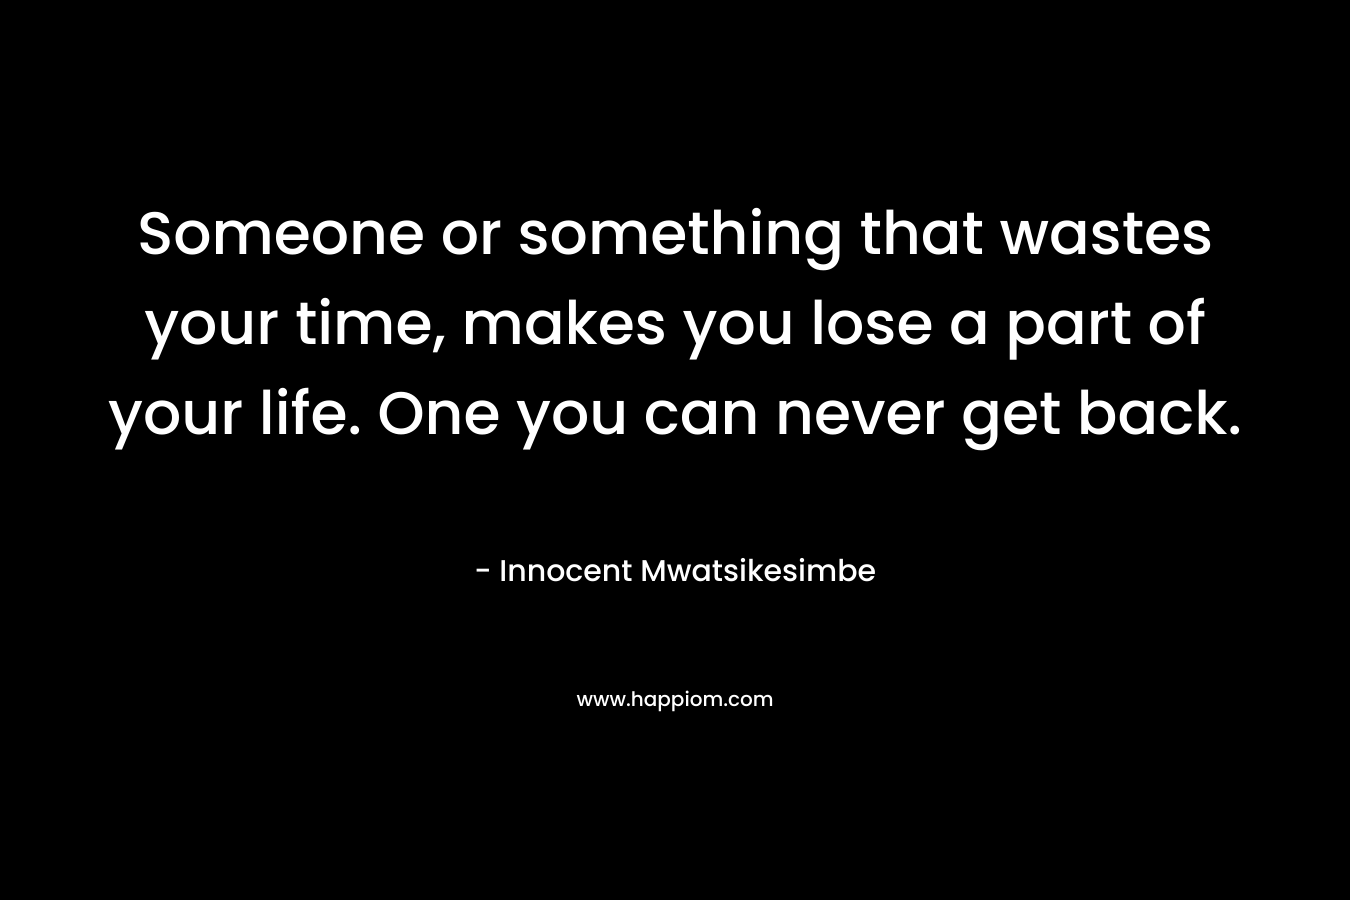 Someone or something that wastes your time, makes you lose a part of your life. One you can never get back. – Innocent Mwatsikesimbe